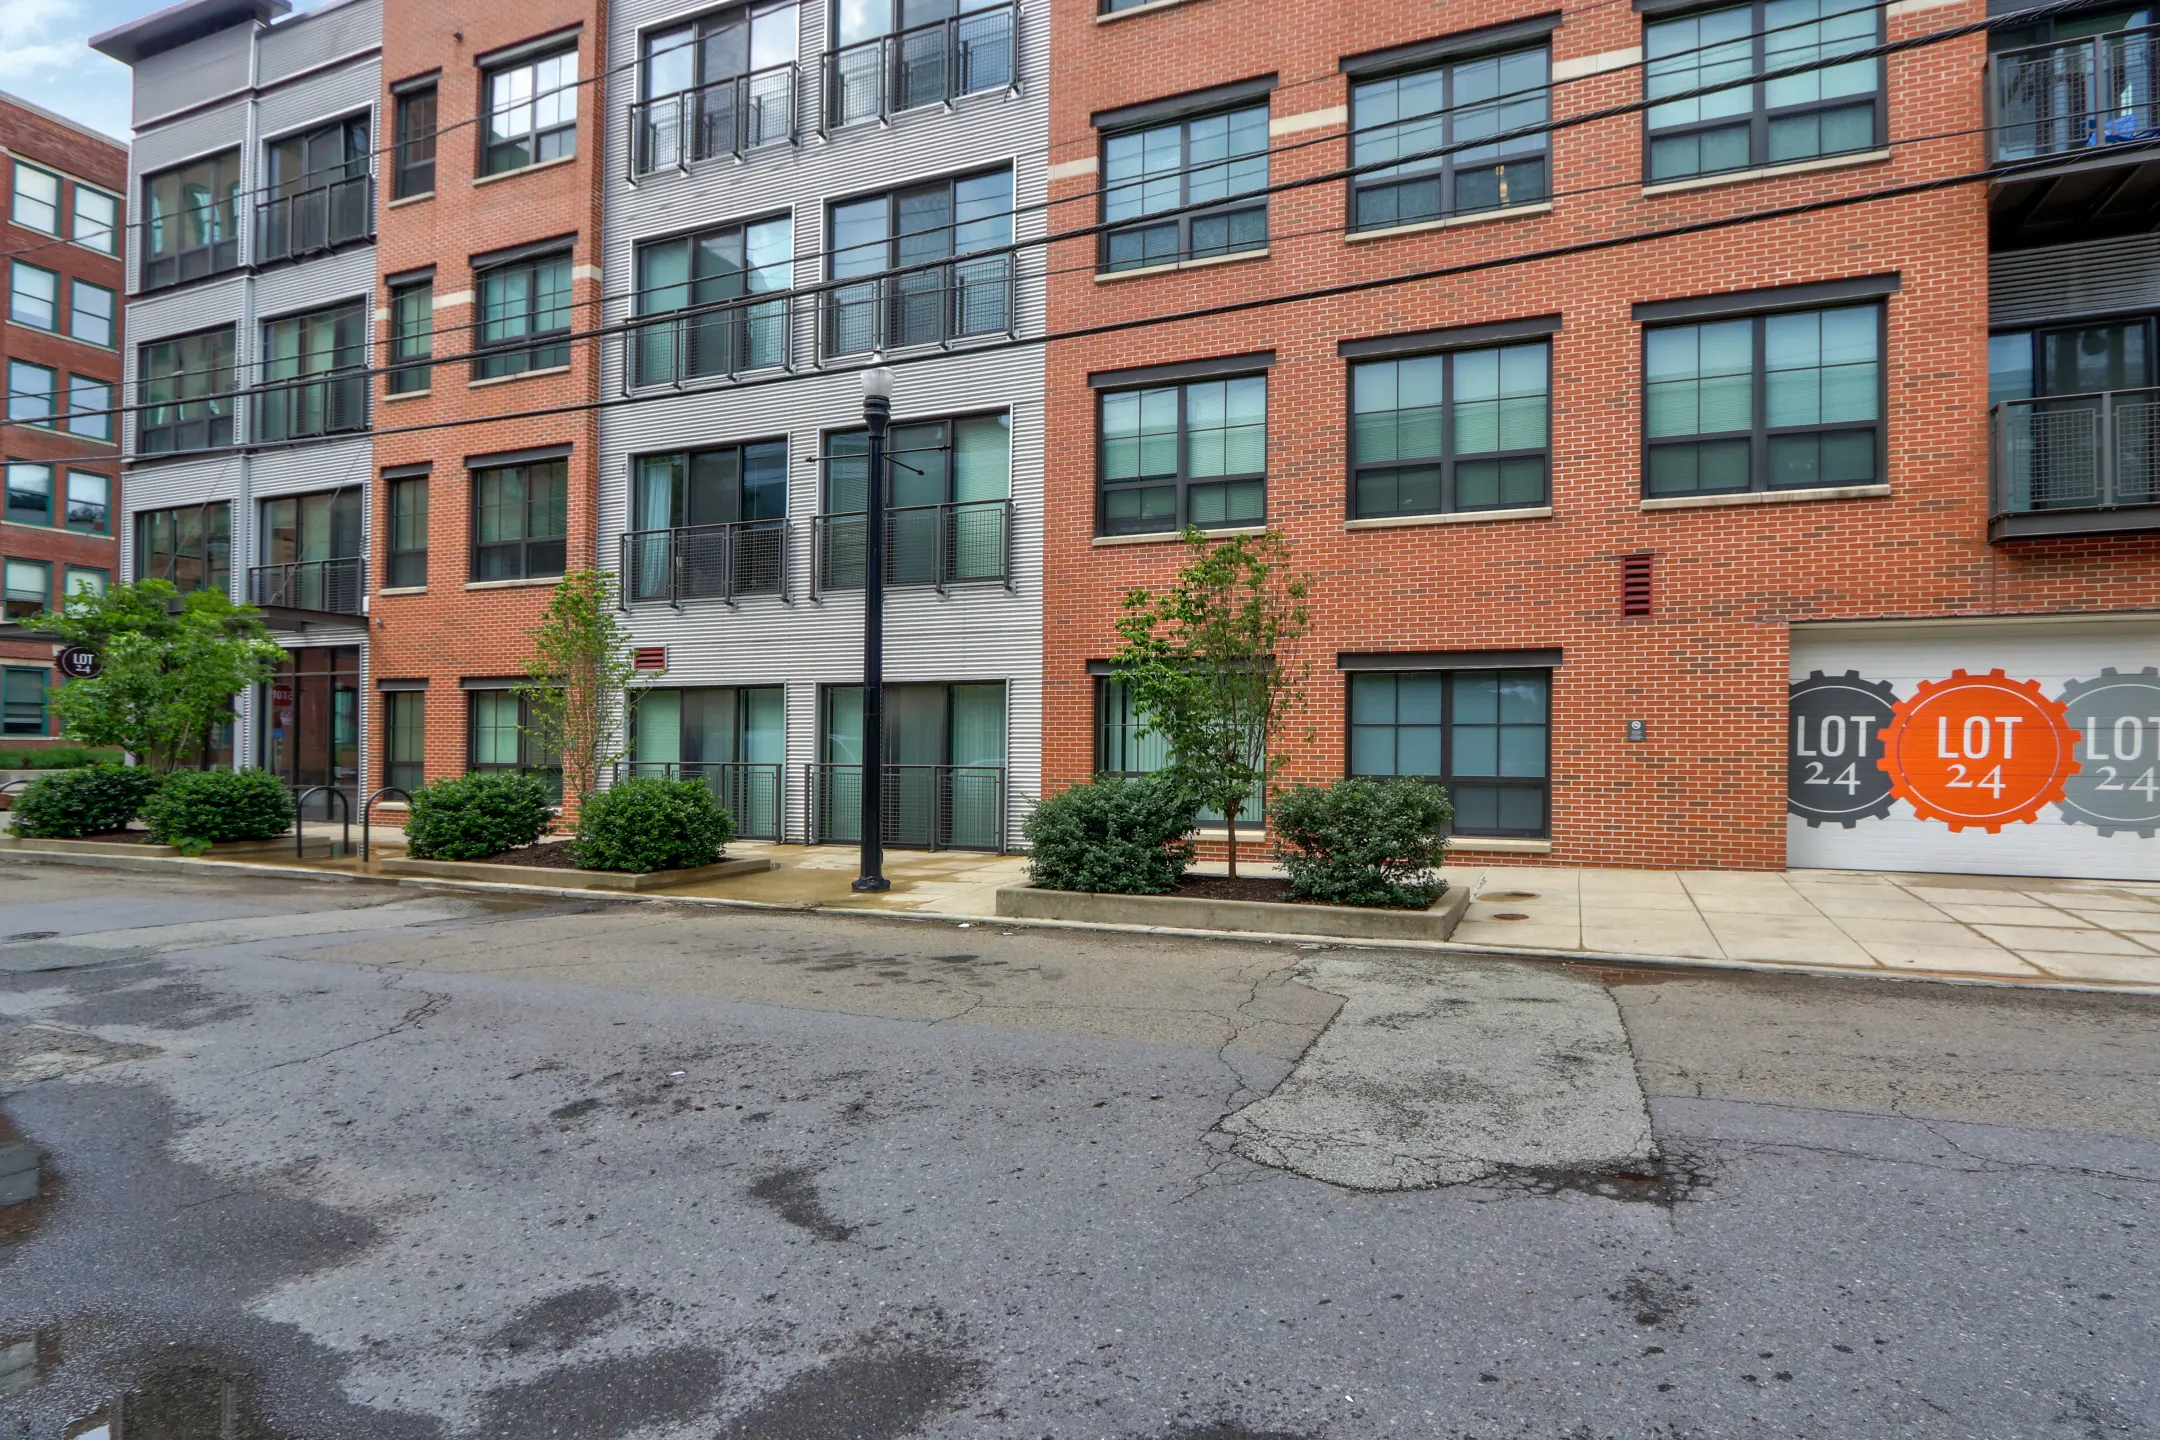 Building - Lot 24 - Pittsburgh, PA